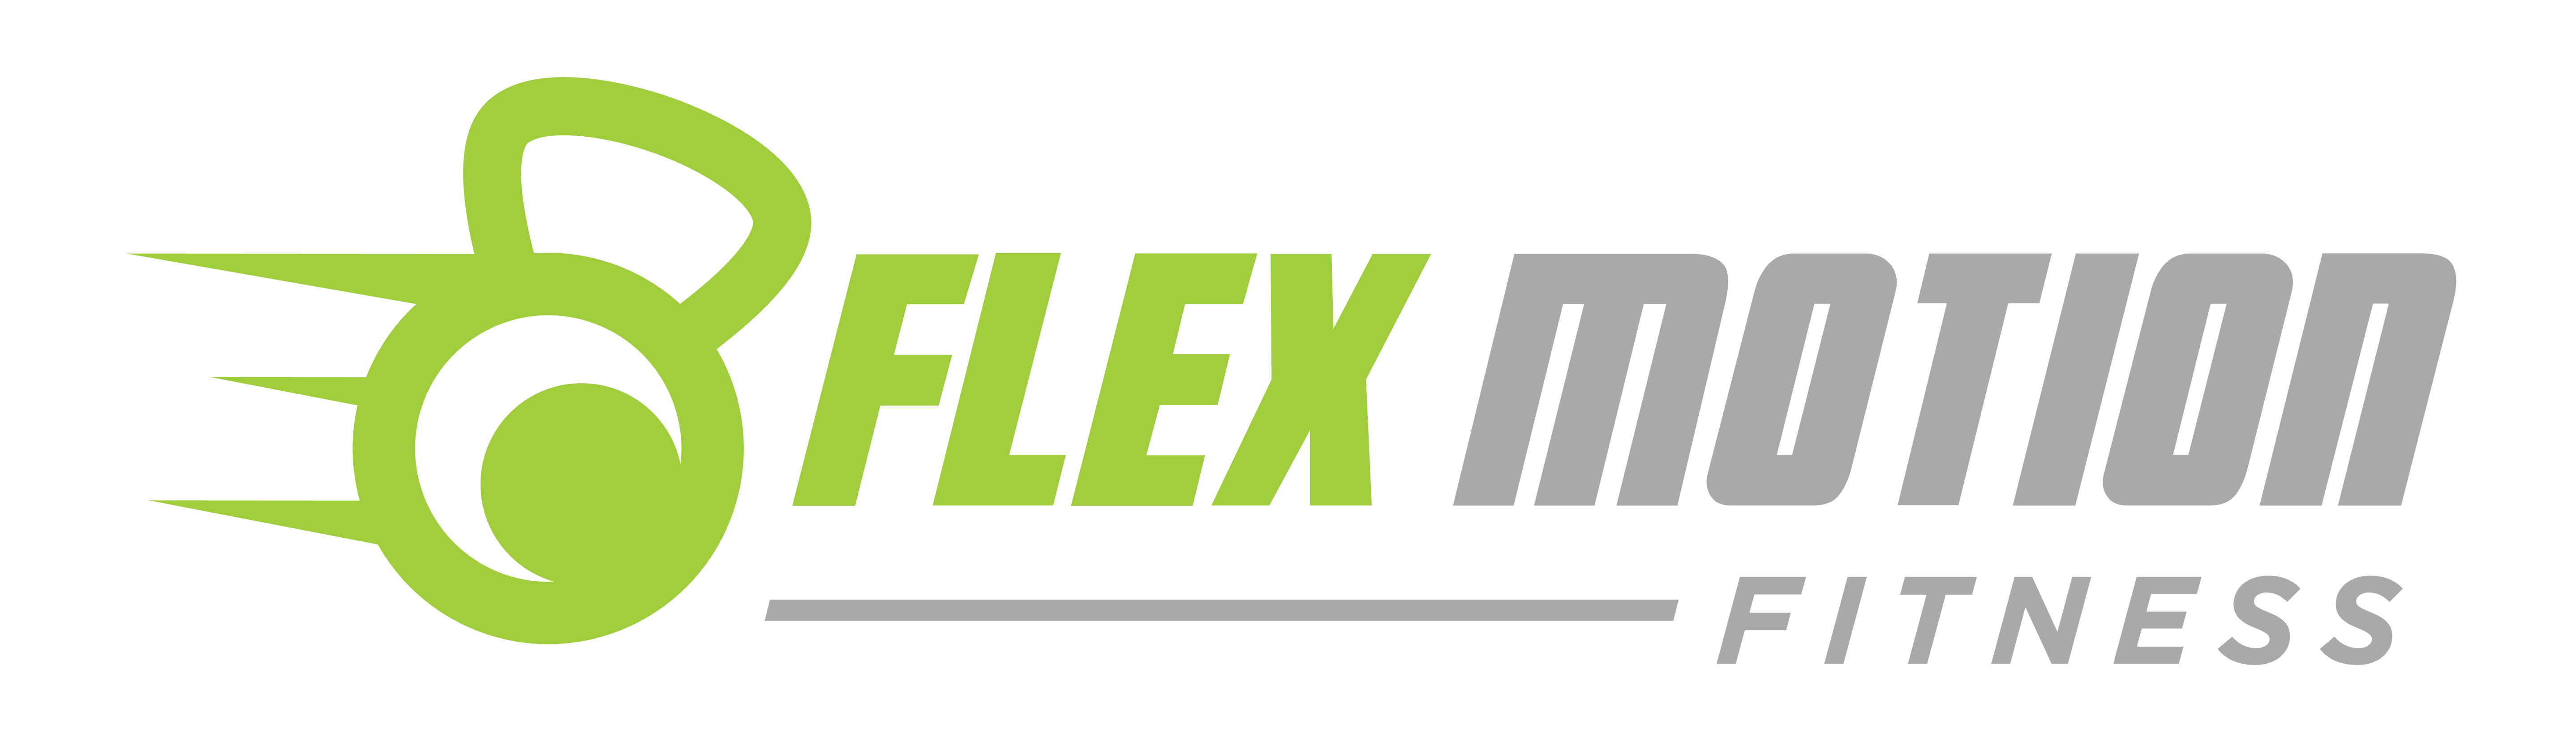 Top Rated Personal Trainer in Macomb Township MI  Flex Motion Fitness is  powered by National Certified Personal Trainer Jenna Neumann. If you want a  personal trainer in Macomb MI or want